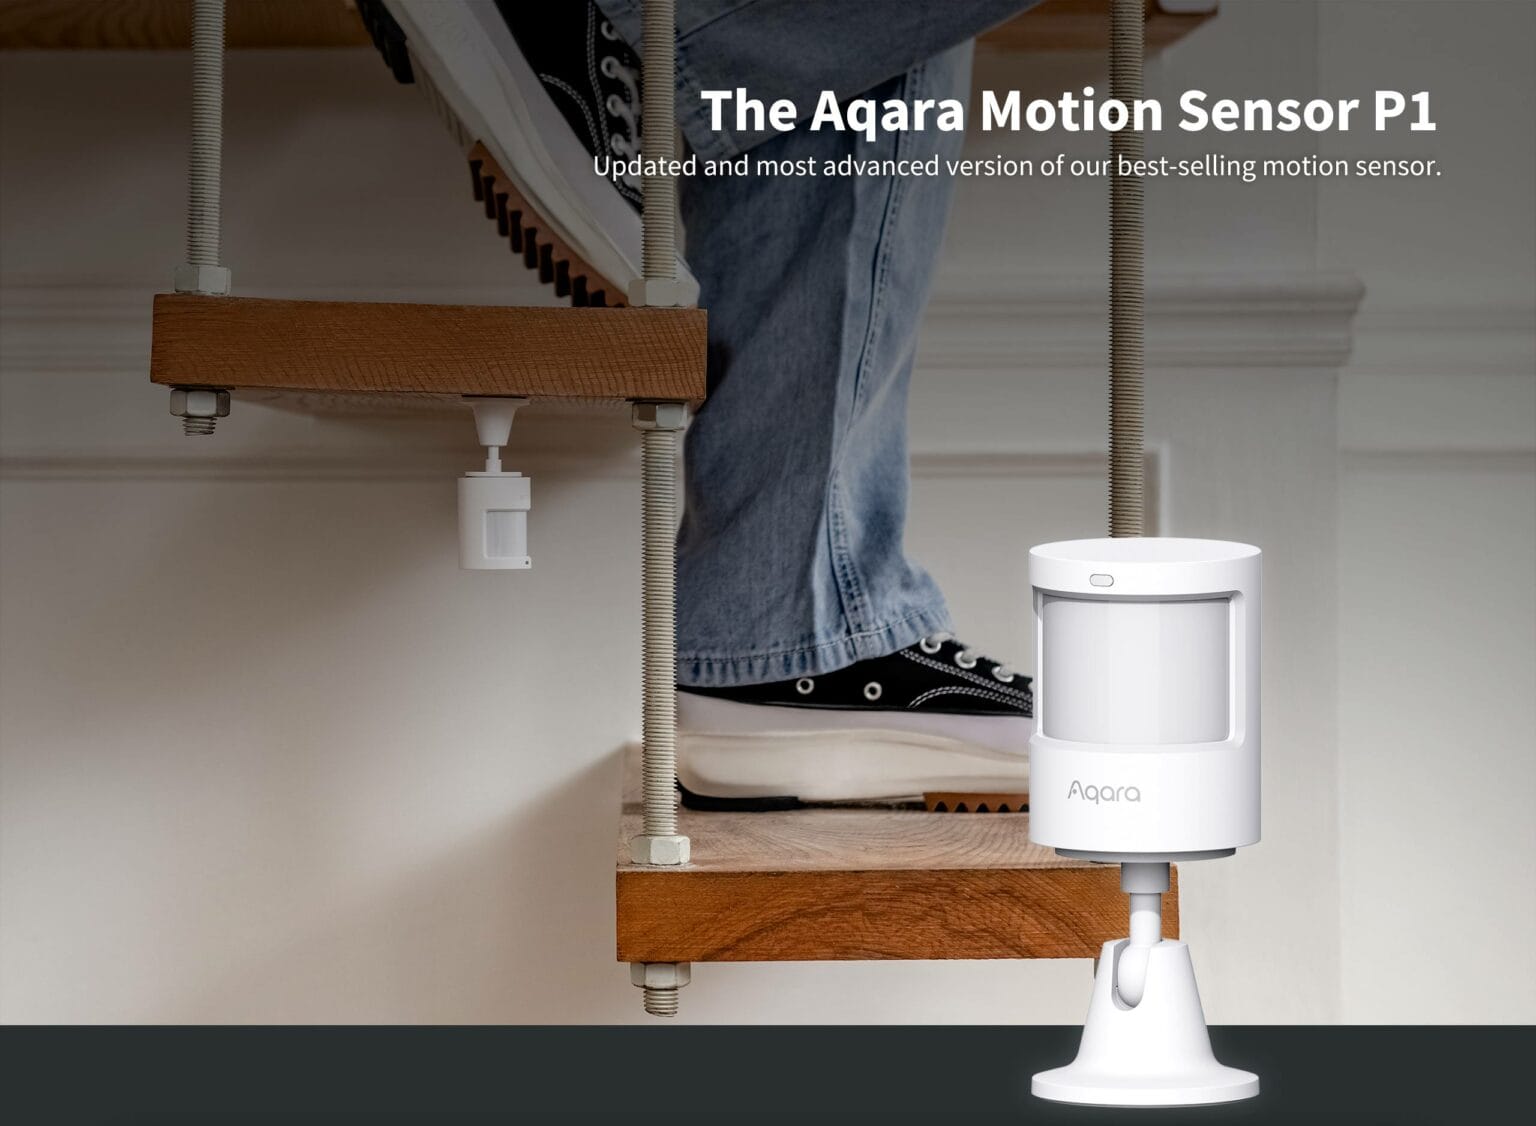 Aqara's updated motion sensor has up to five years of battery life.